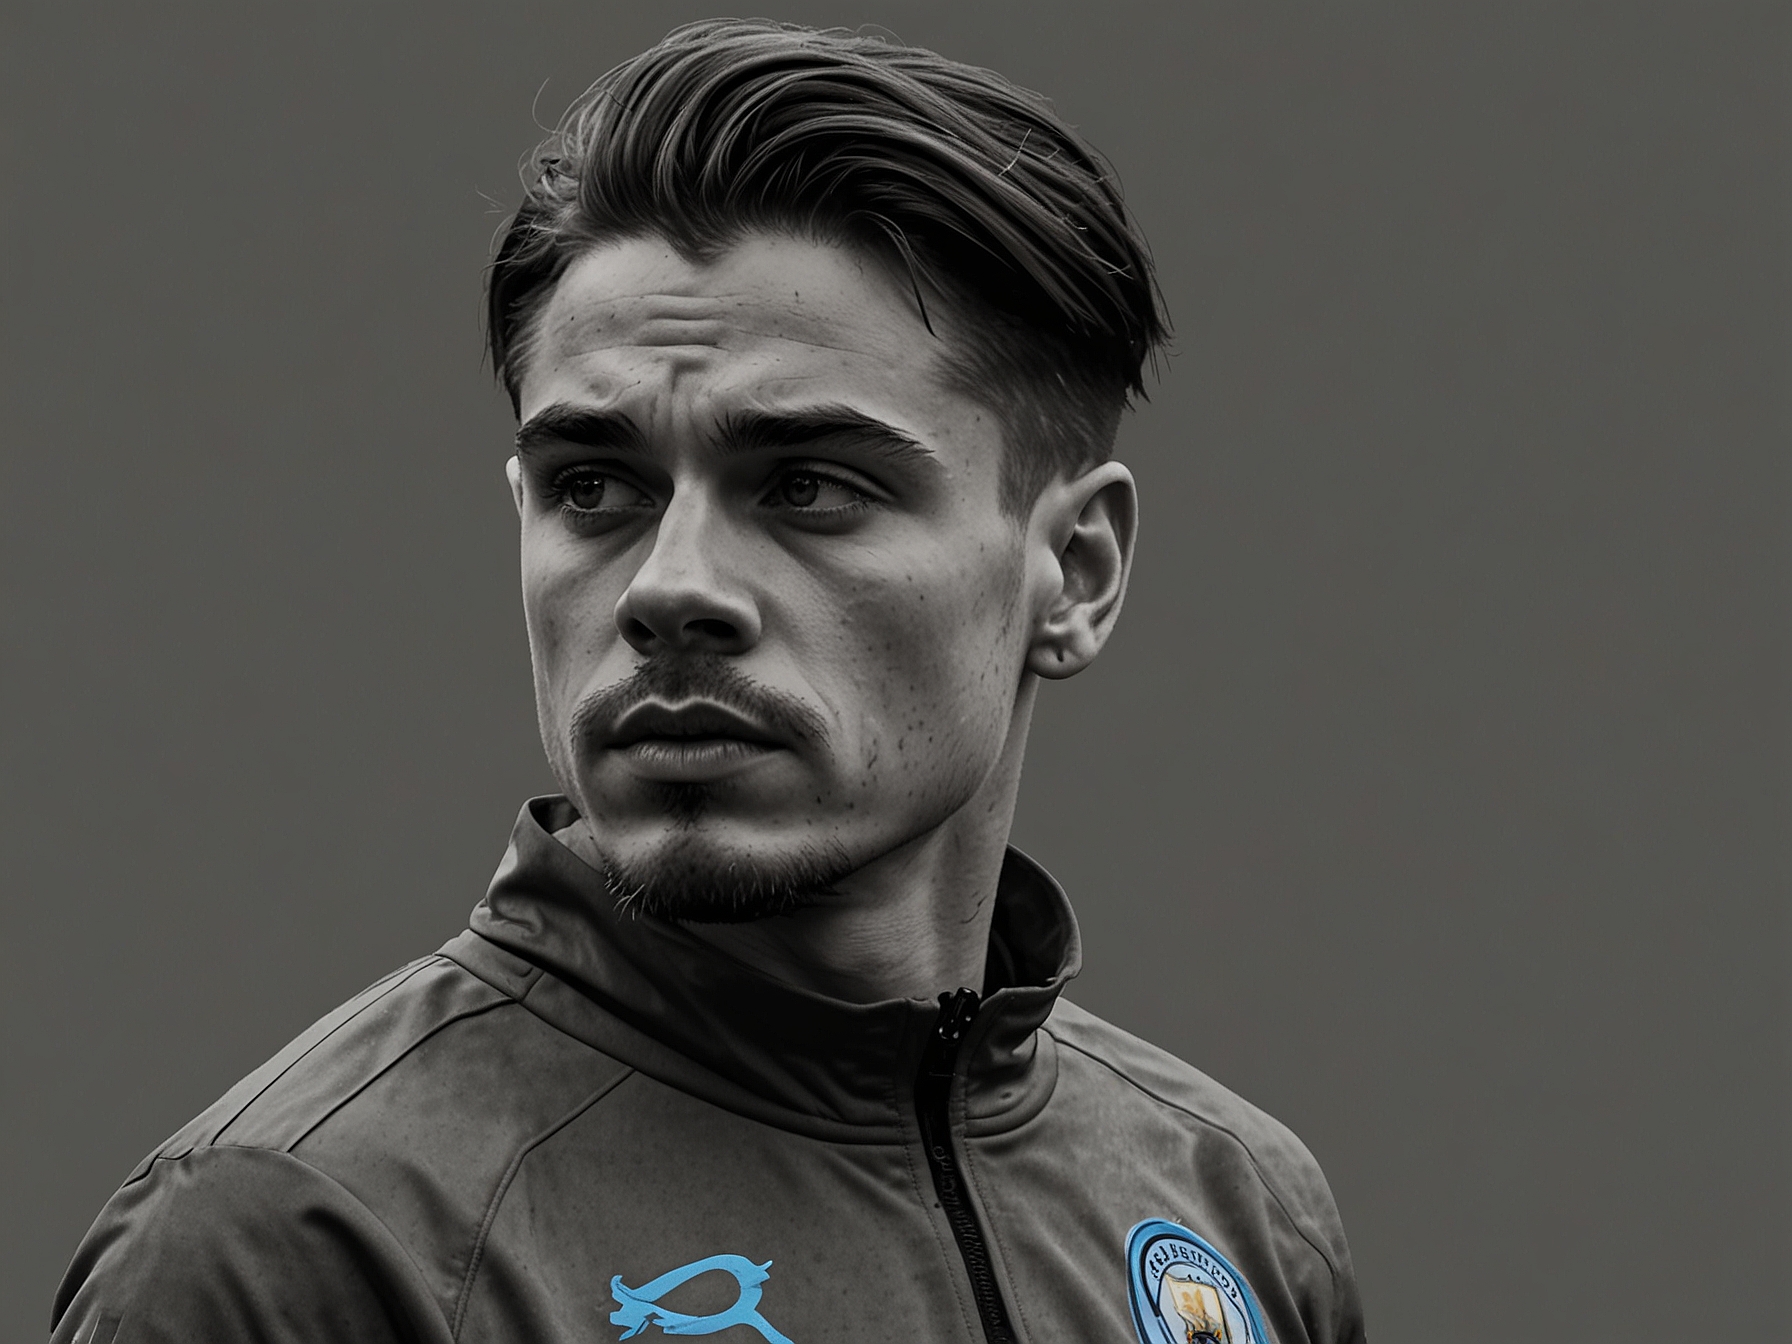 Jack Grealish in Manchester City training gear, looking determined as he returns to club duties following his exclusion from the England Euro 2024 squad.